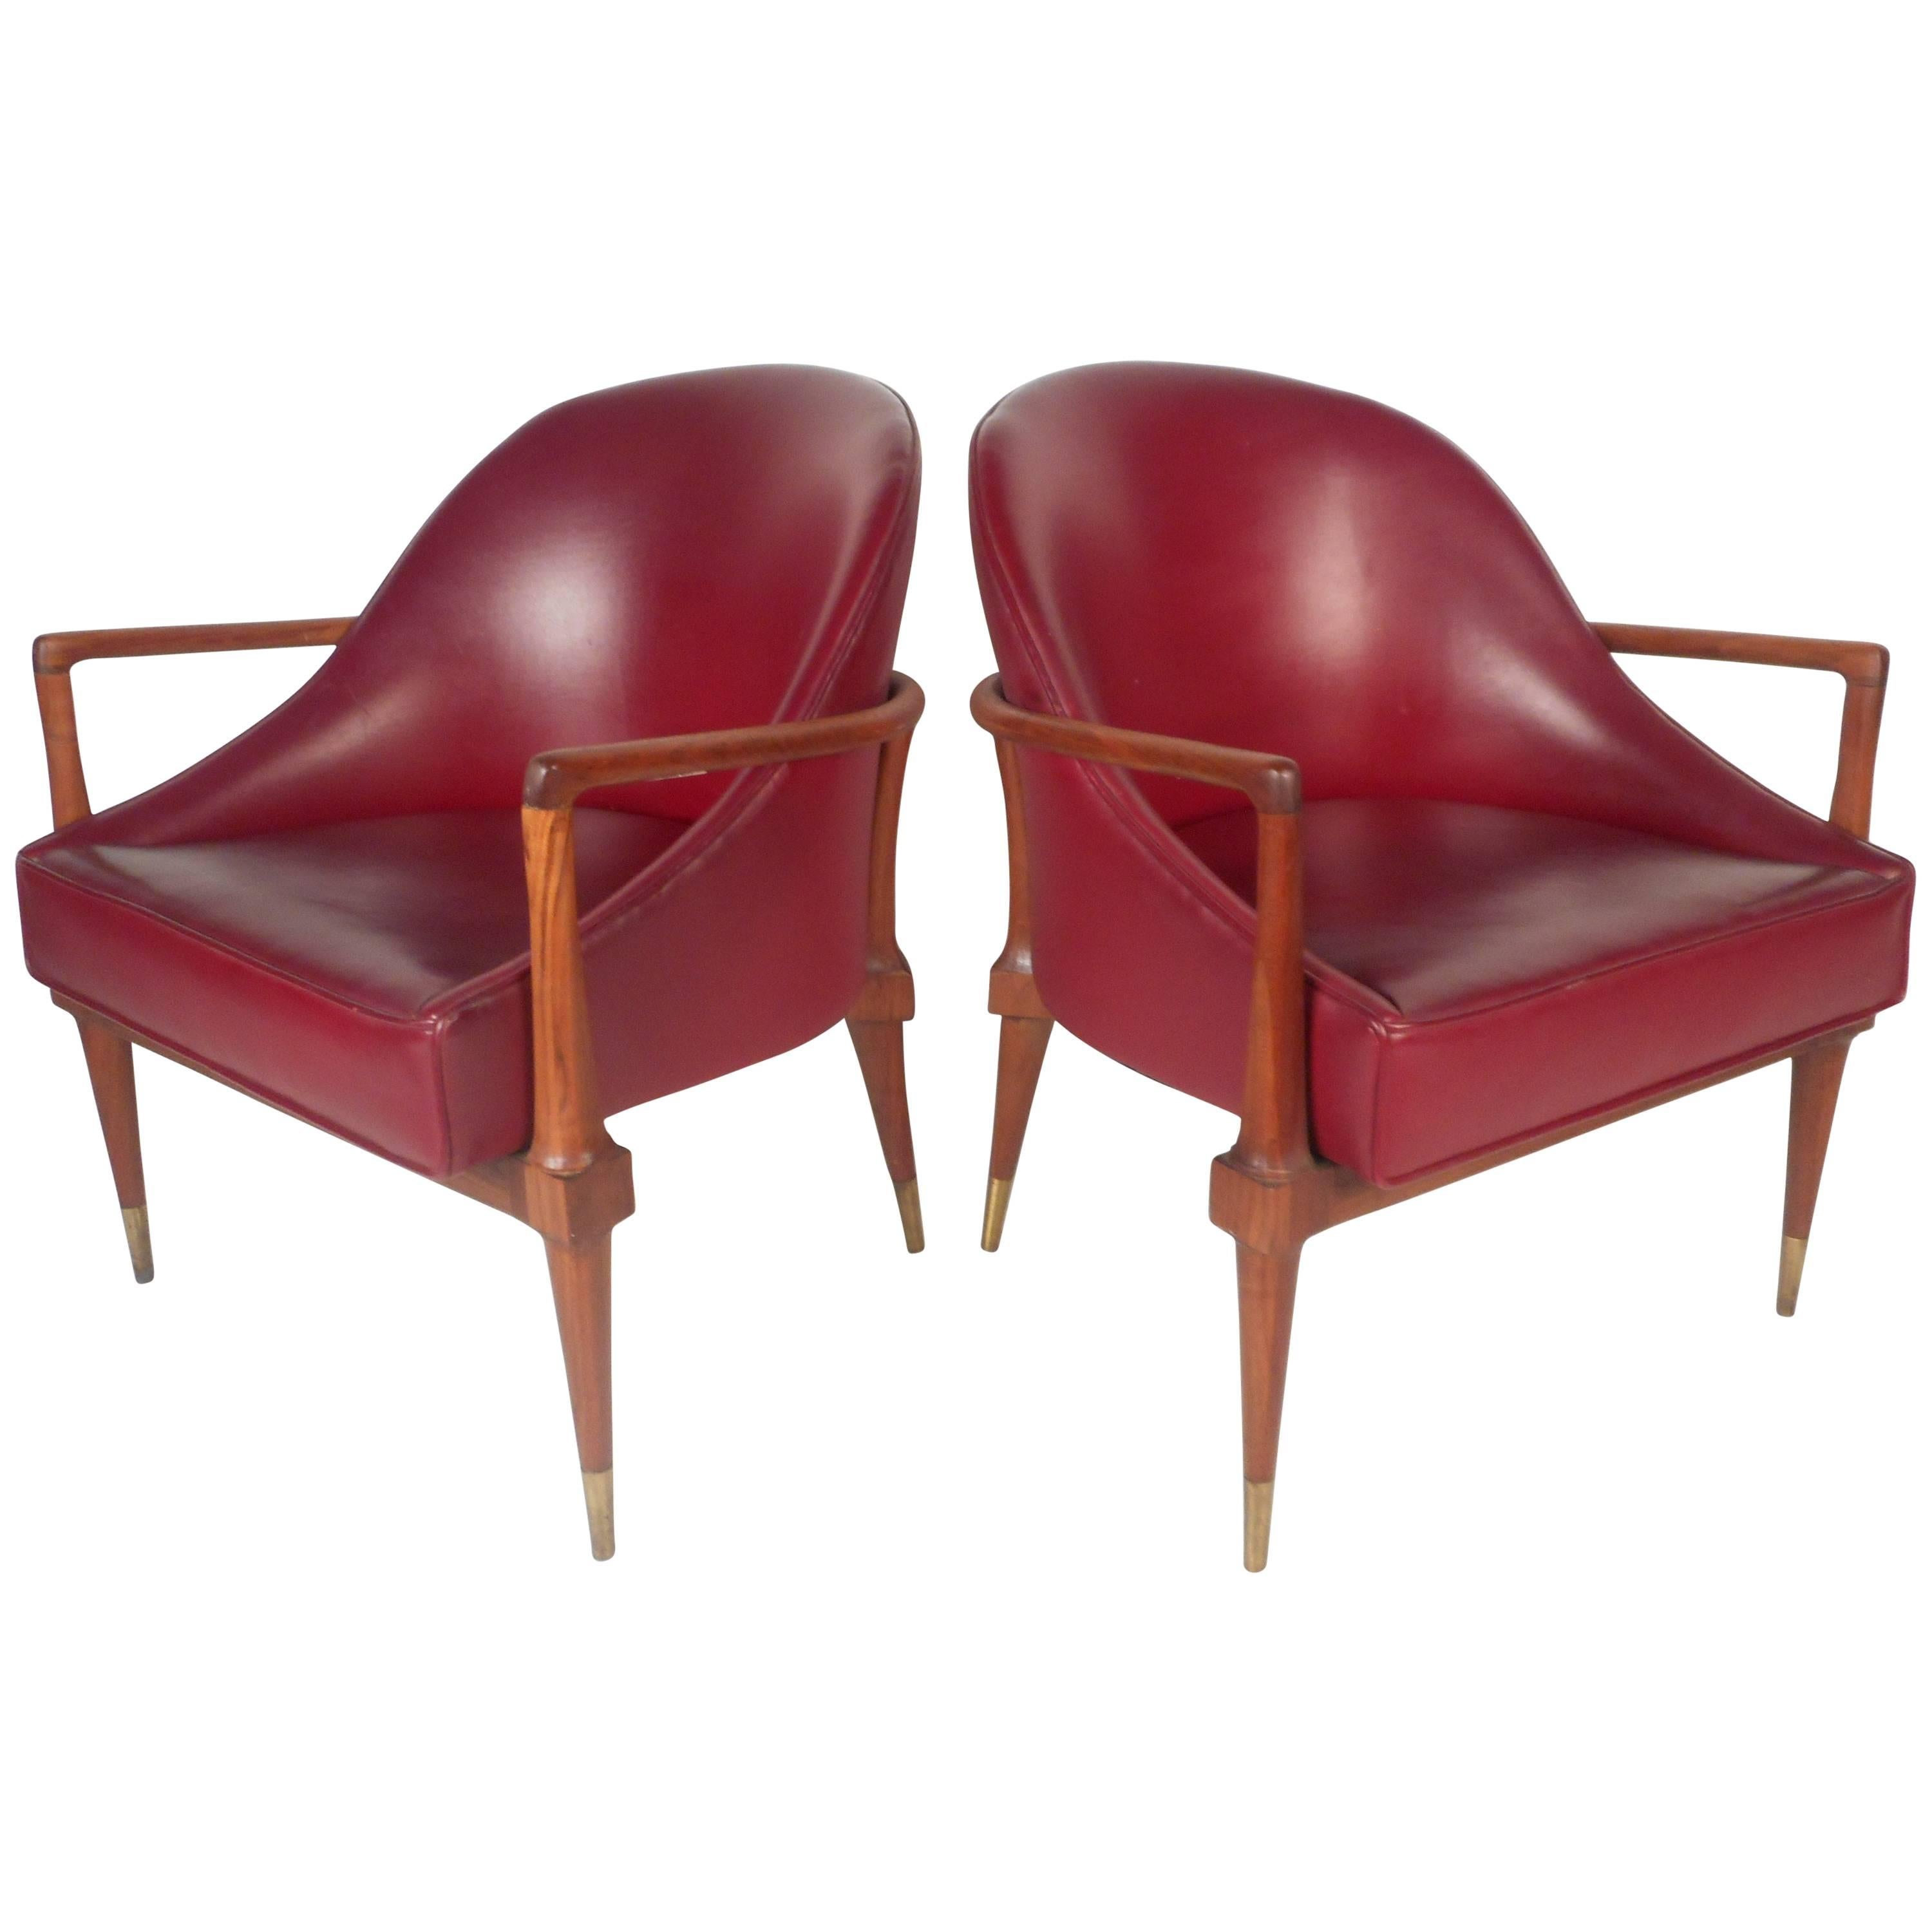 Unique Pair of Mid-Century Modern Walnut Side Chairs